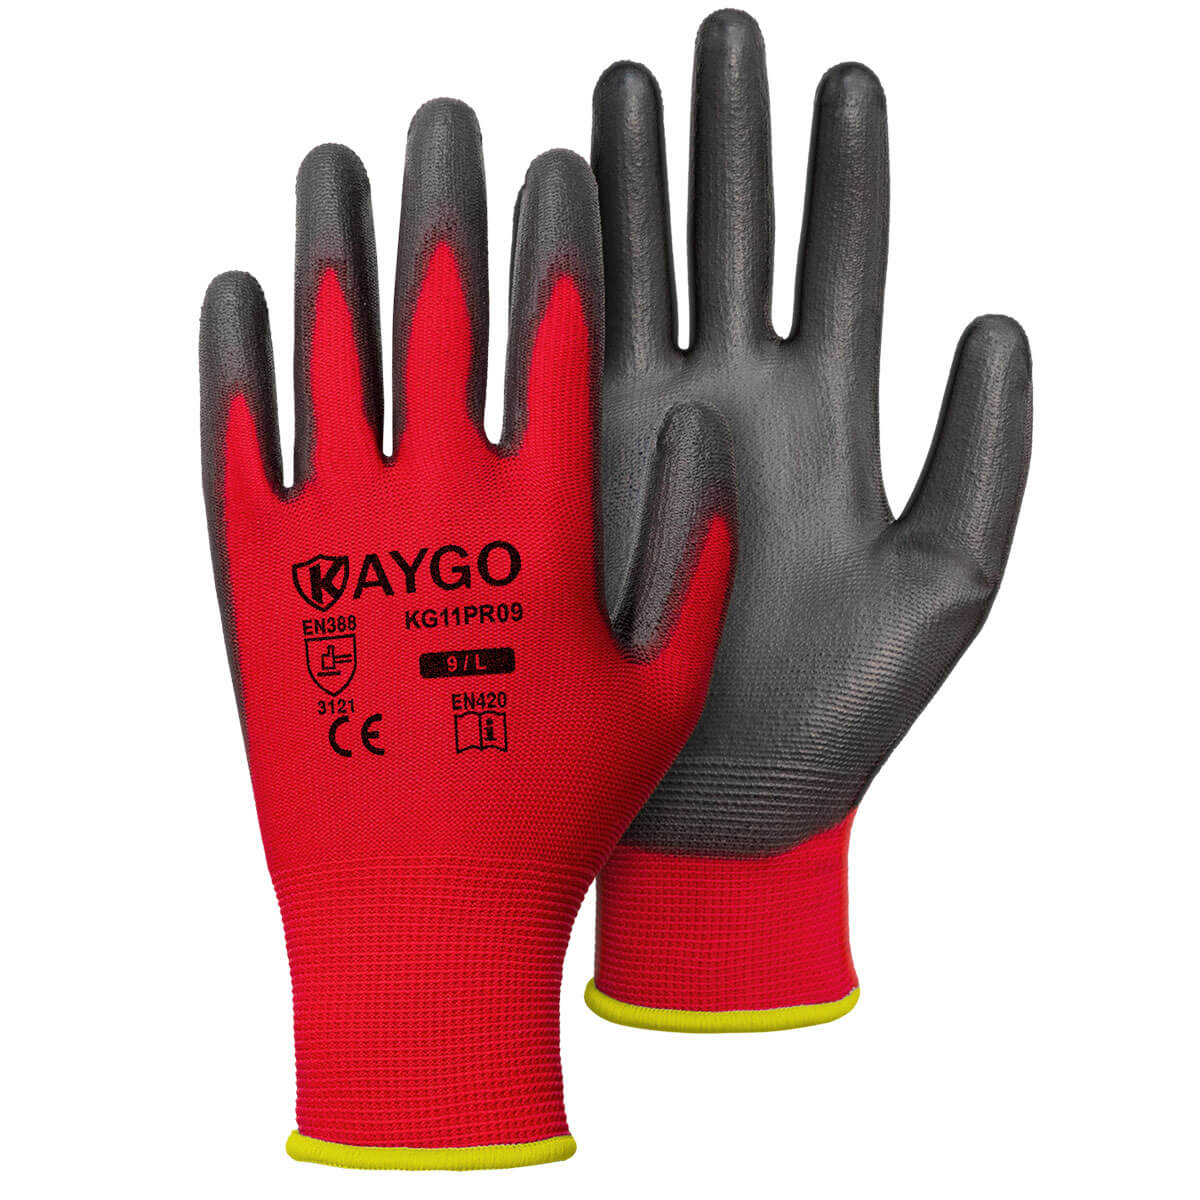 12 Pairs] Red White Work Gloves - Rubber Coated Working Glove